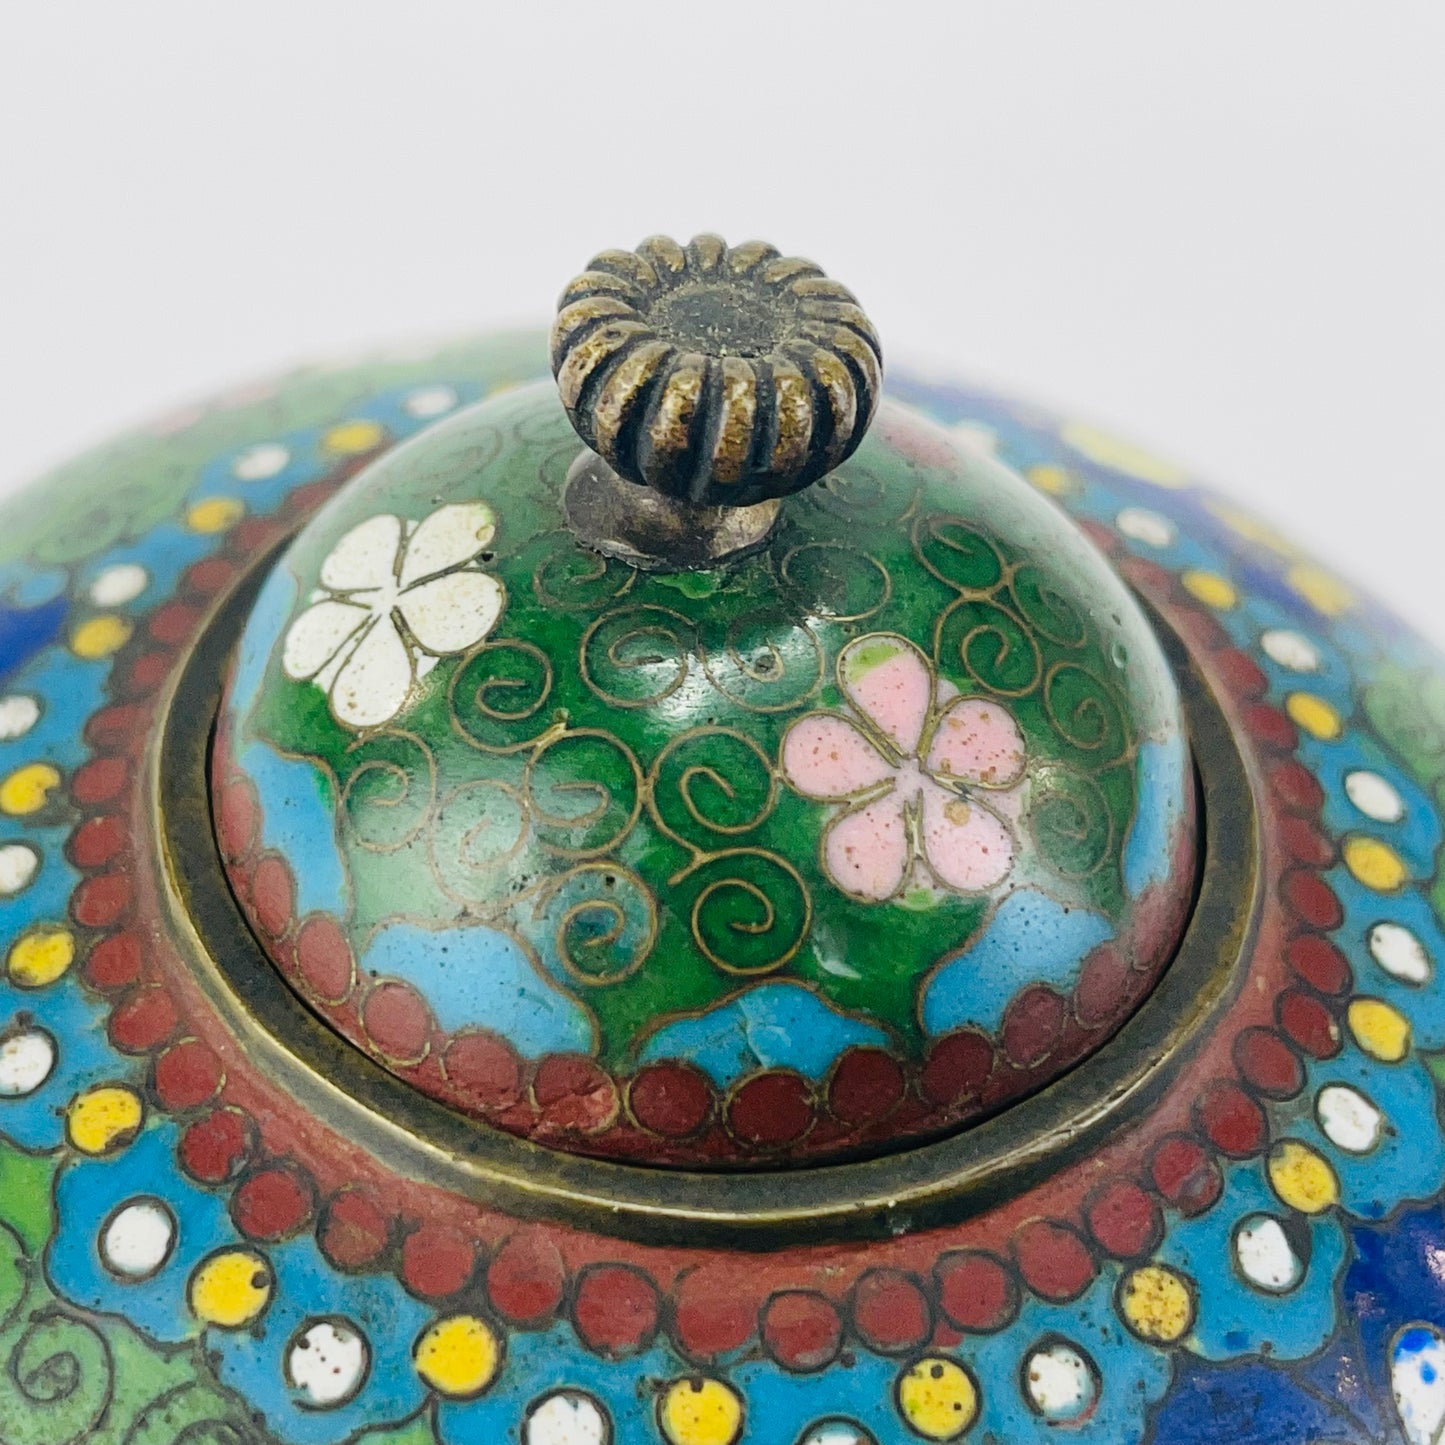 Antique Chinese Late Qing c1910 Blue Cloisonné Koro Censer for Incense 3”